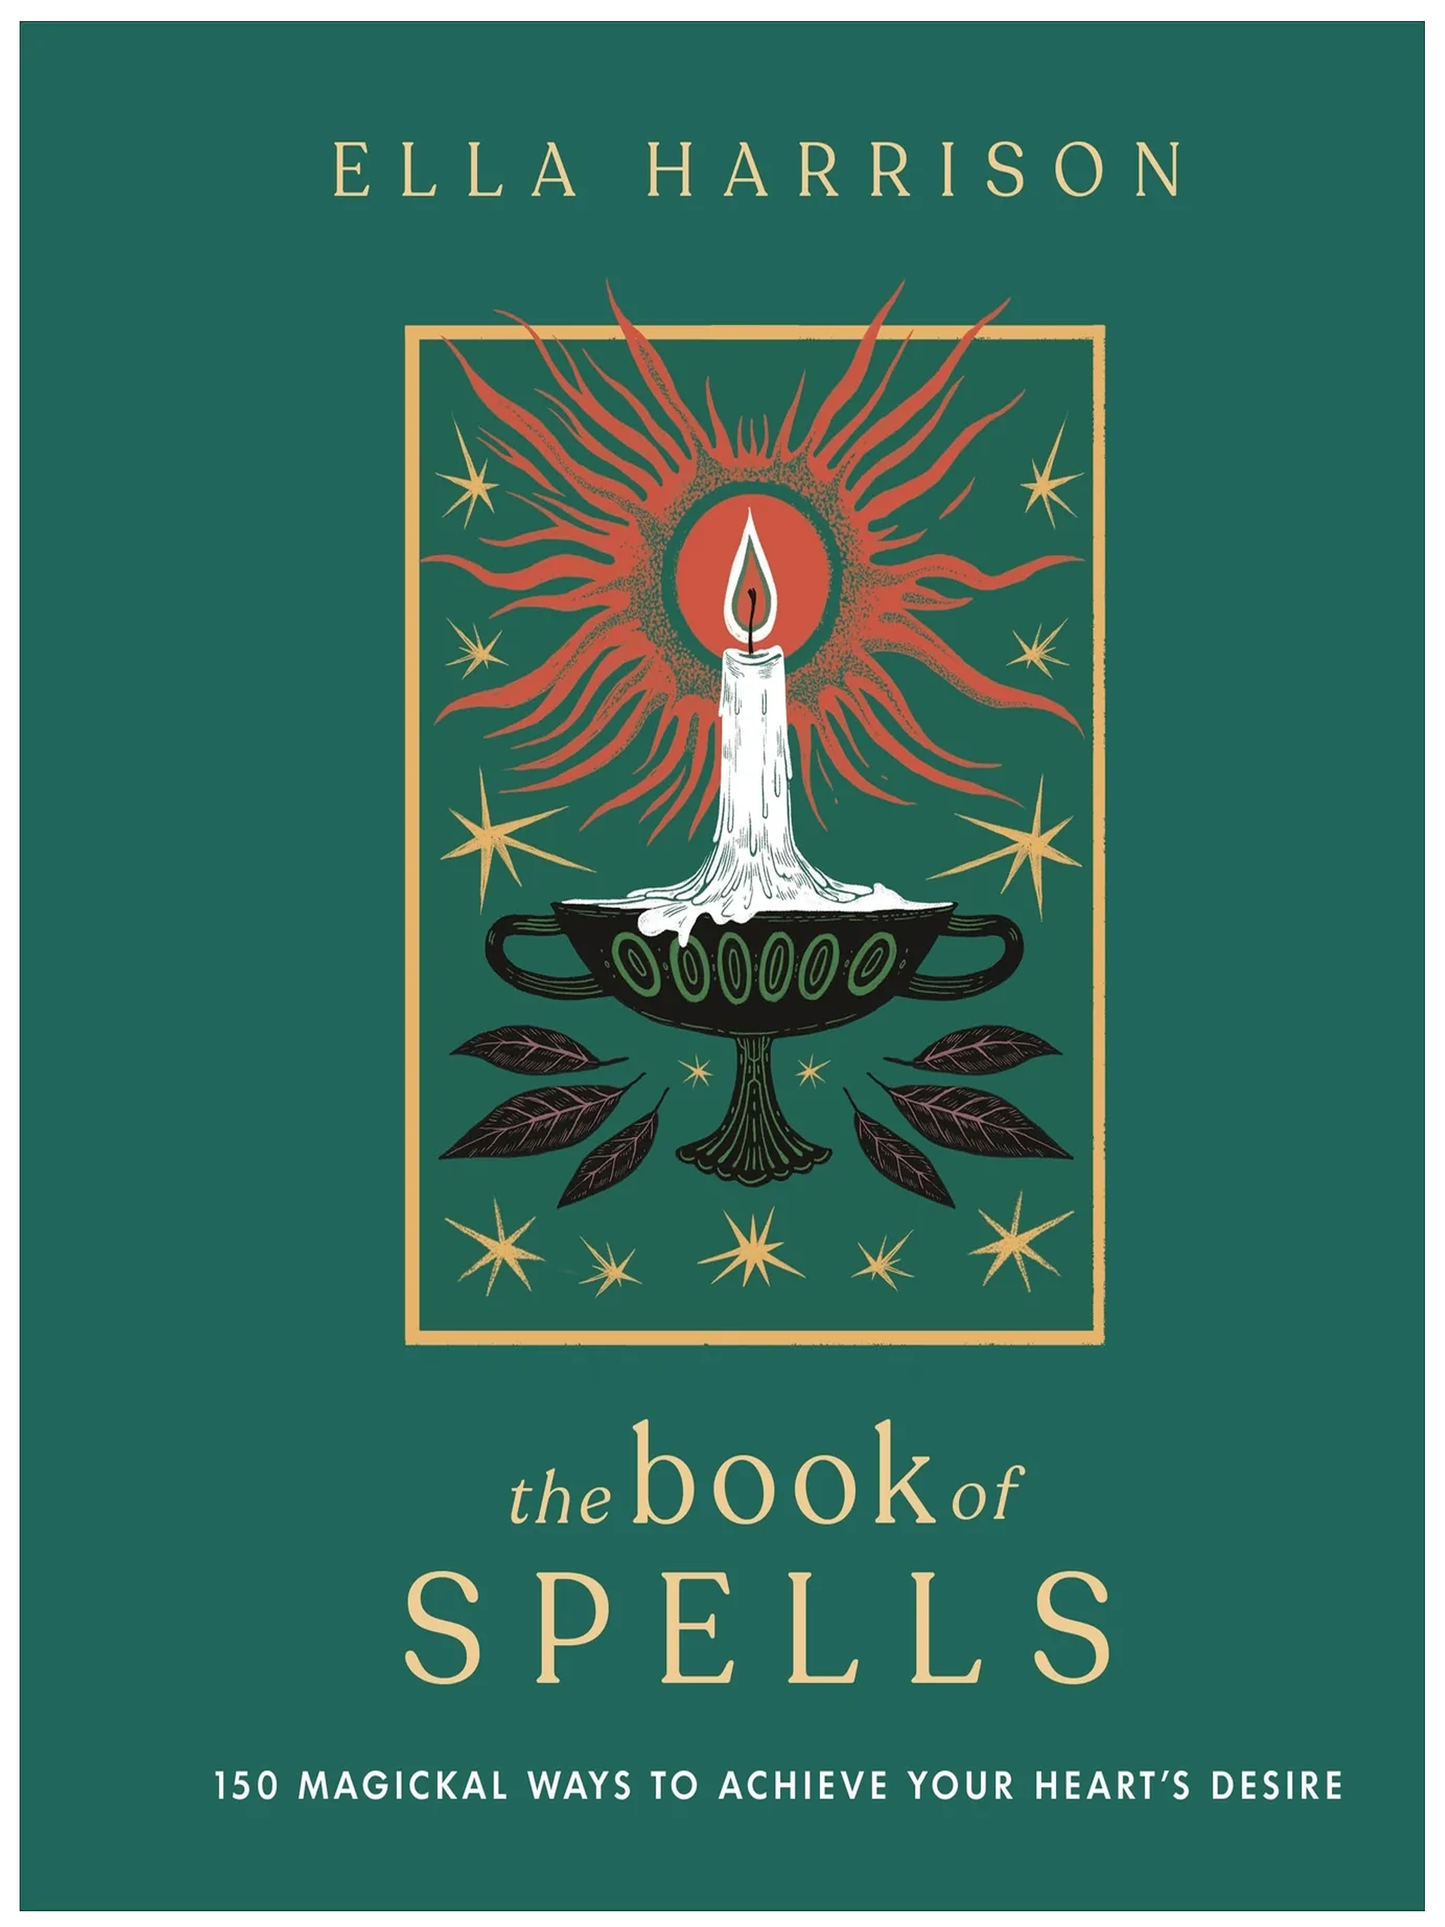 Book of Spells, The: 150 Magical Ways to Achieve Your Heart's Desire